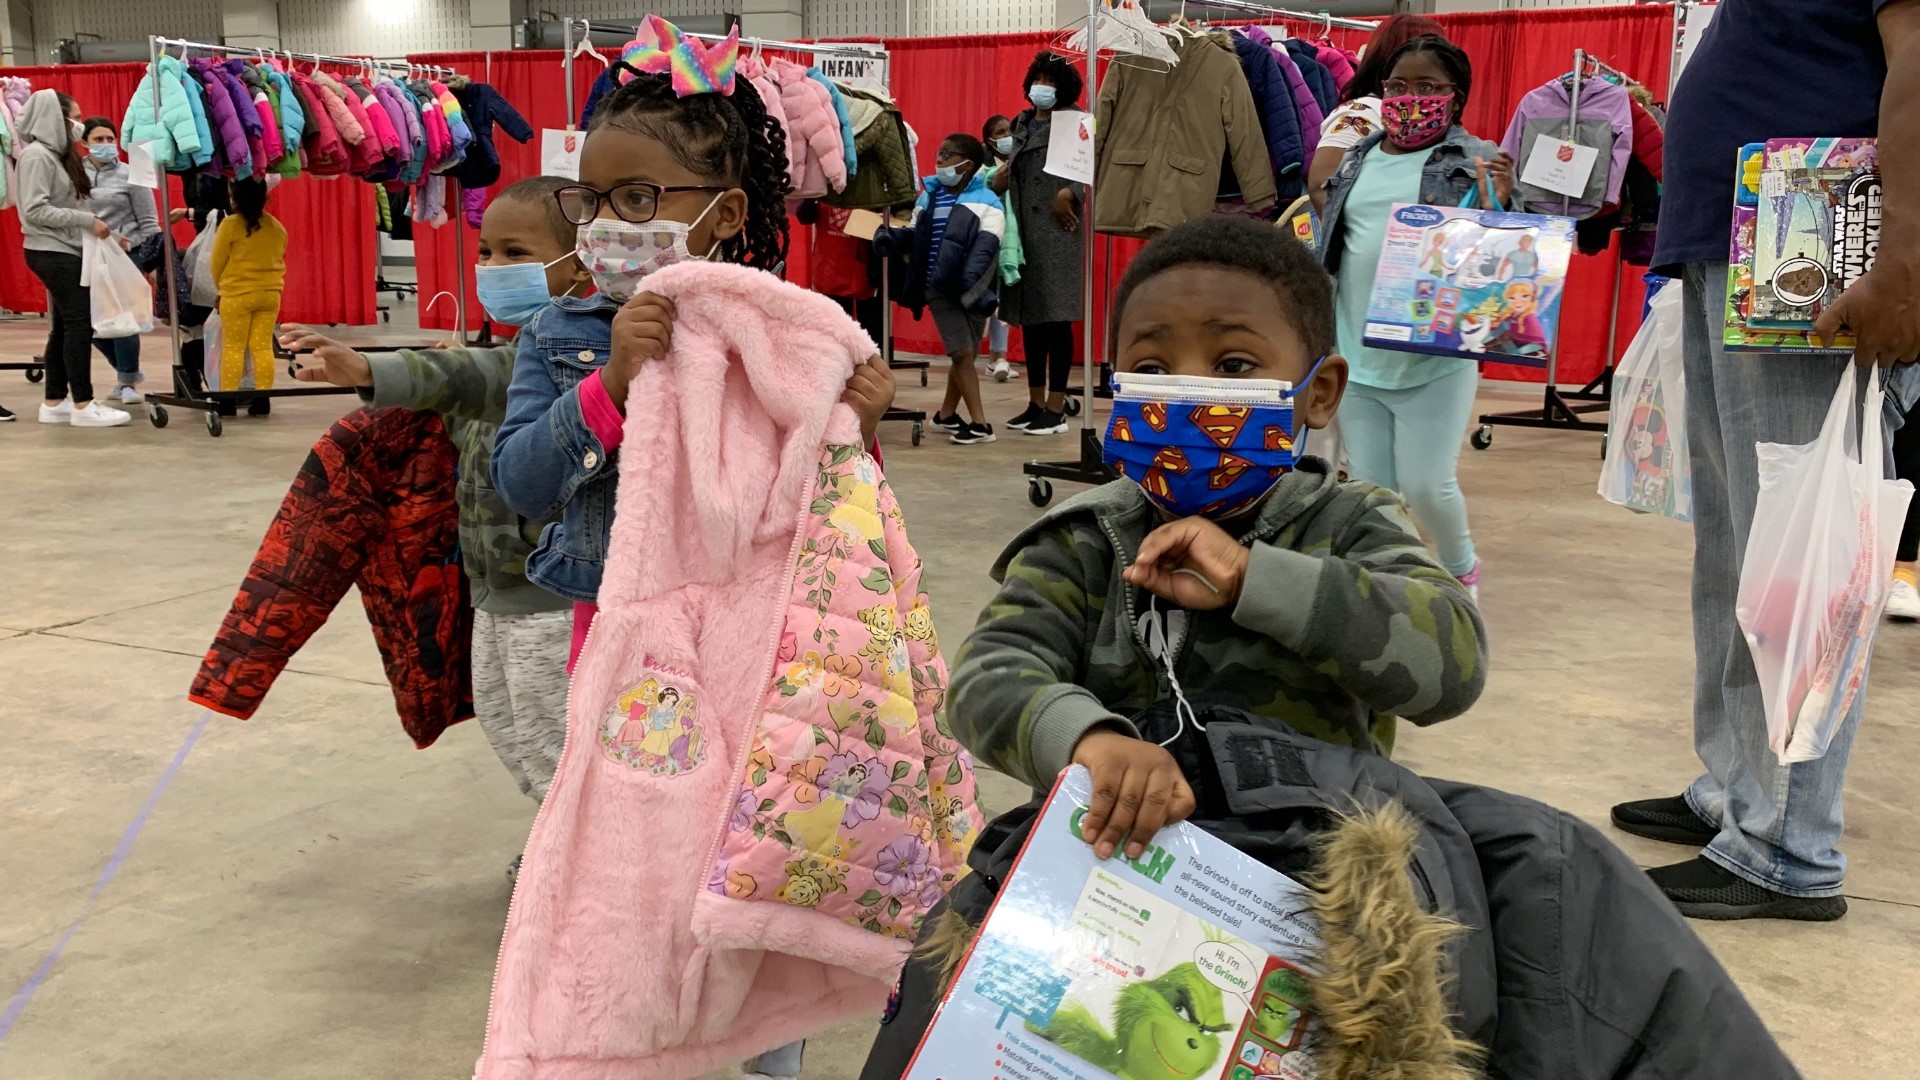 2,700 children were registered to receive coats. The remaining coats will go to schools and agencies and some will go to Afghan children at Camp Atterbury.